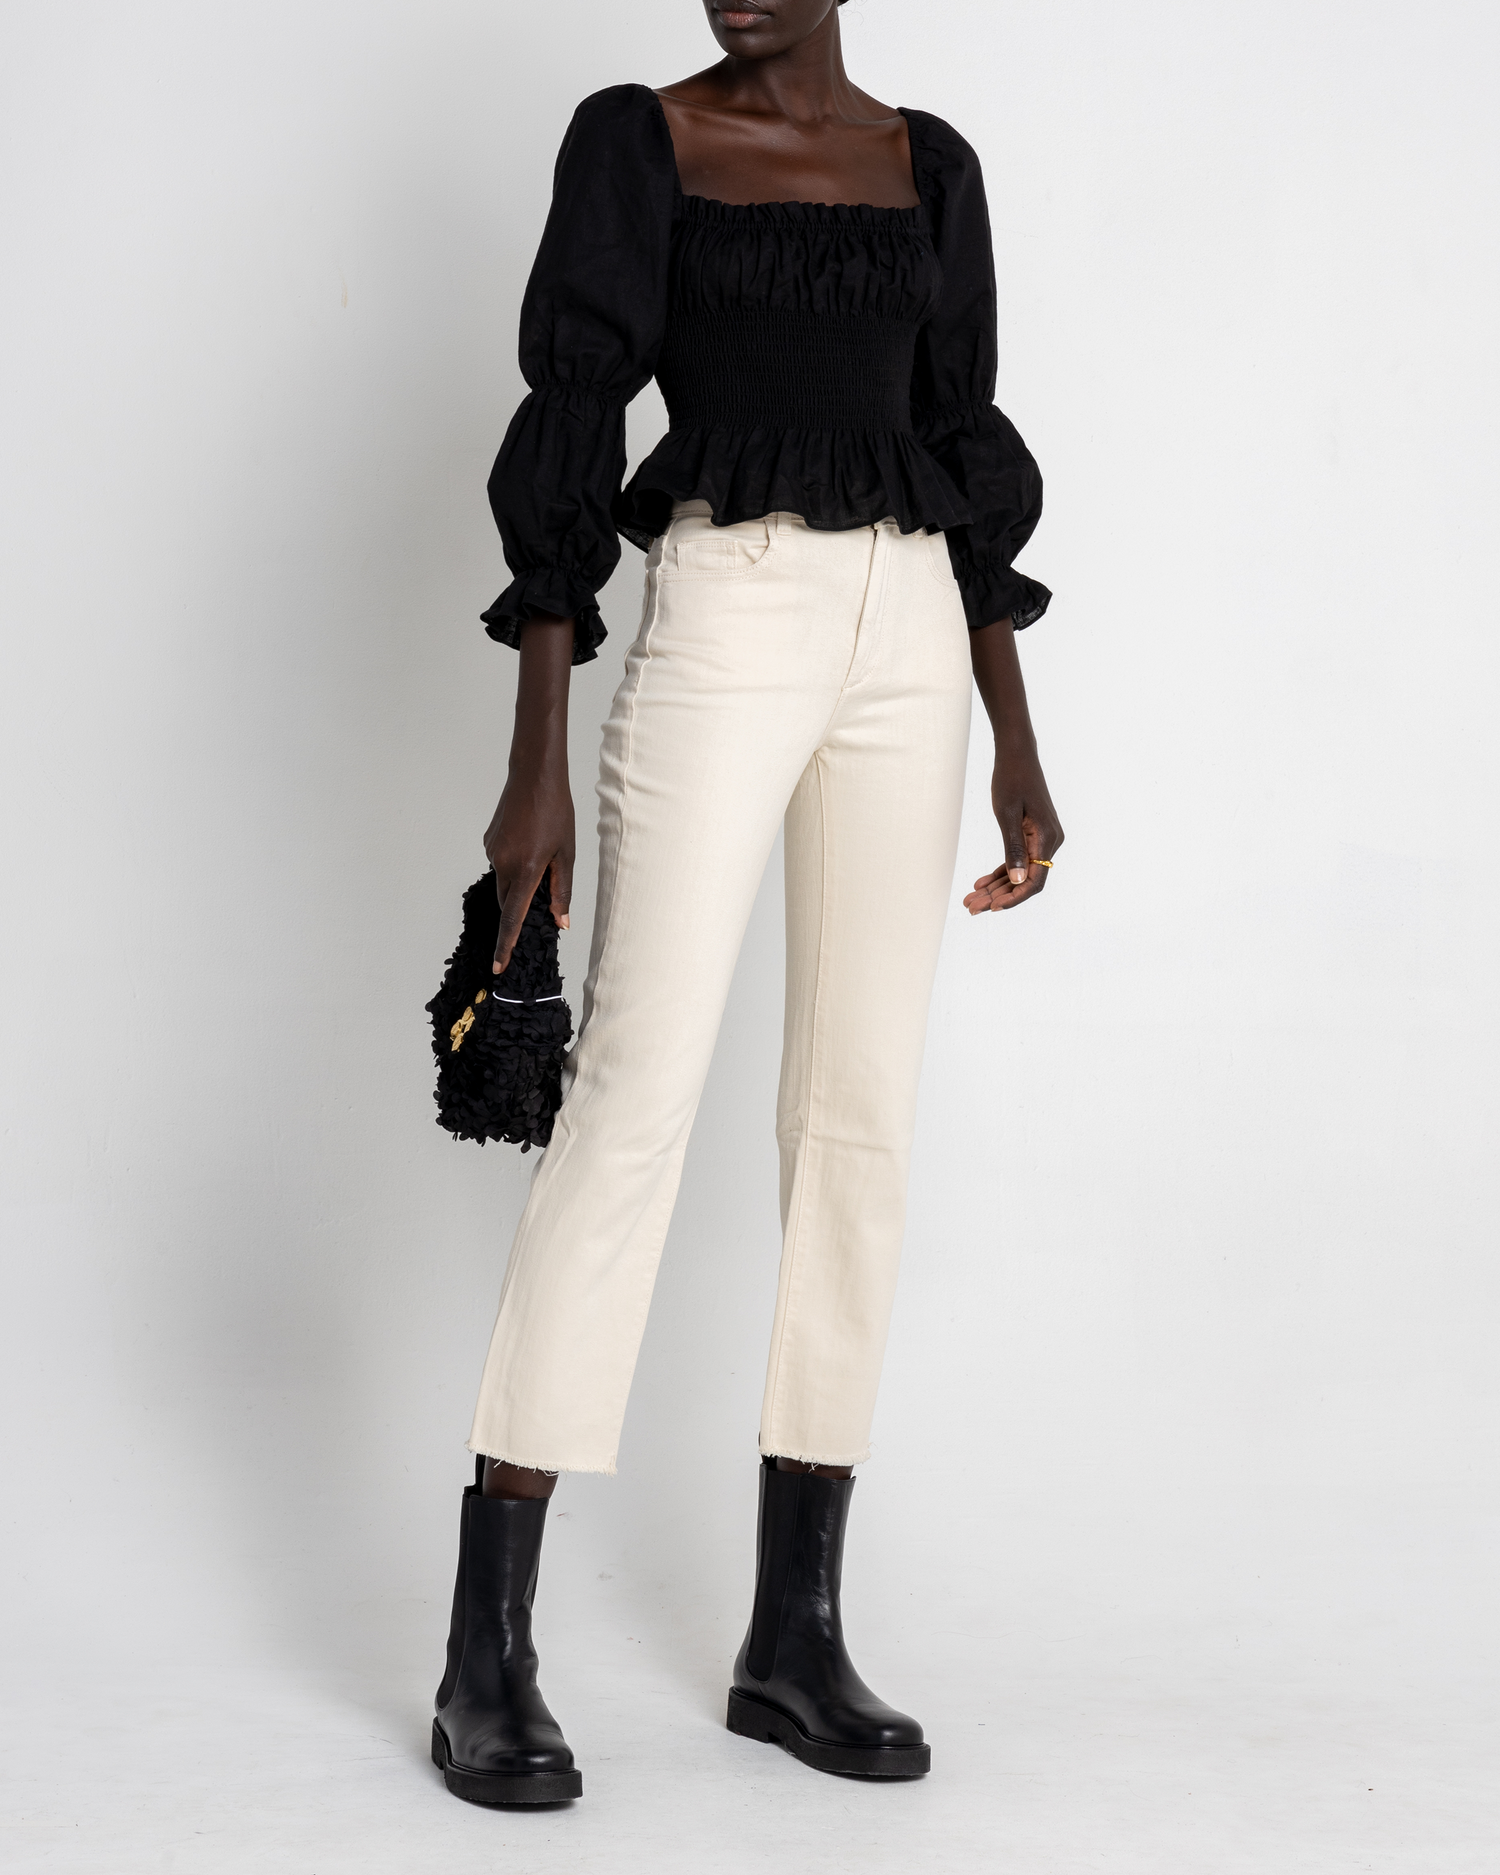 Third image of Gia Top, a black puff sleeve top, puff sleeves, square neckline